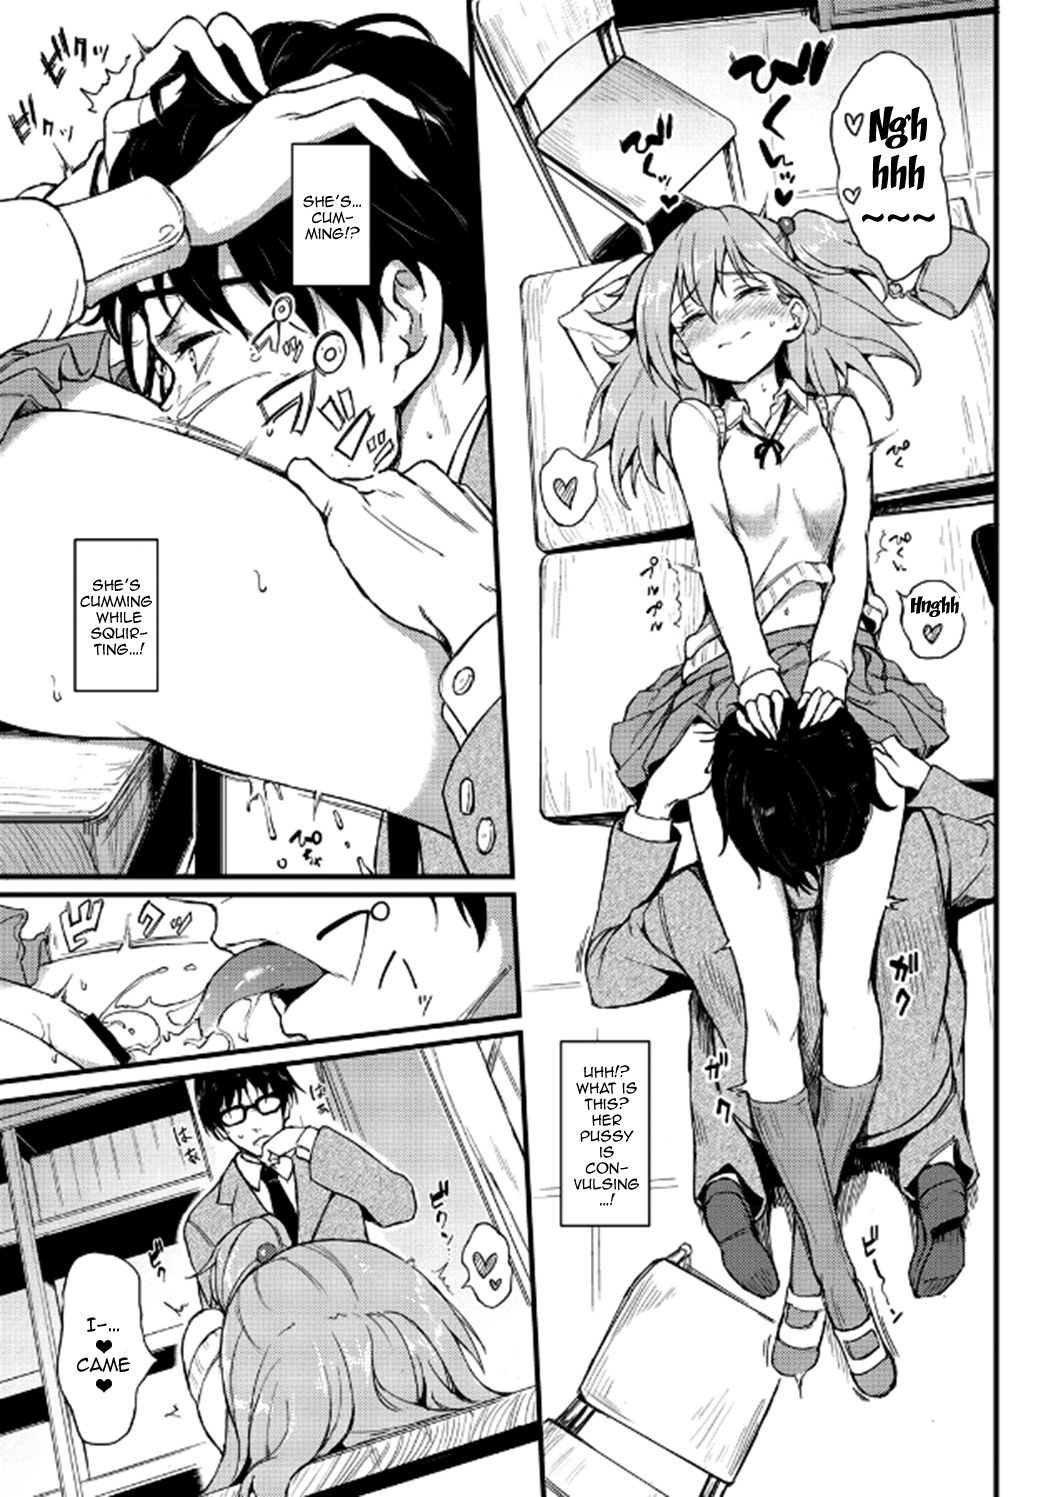 Lovely Aina-chan - Chapter 1 porn comic picture 15